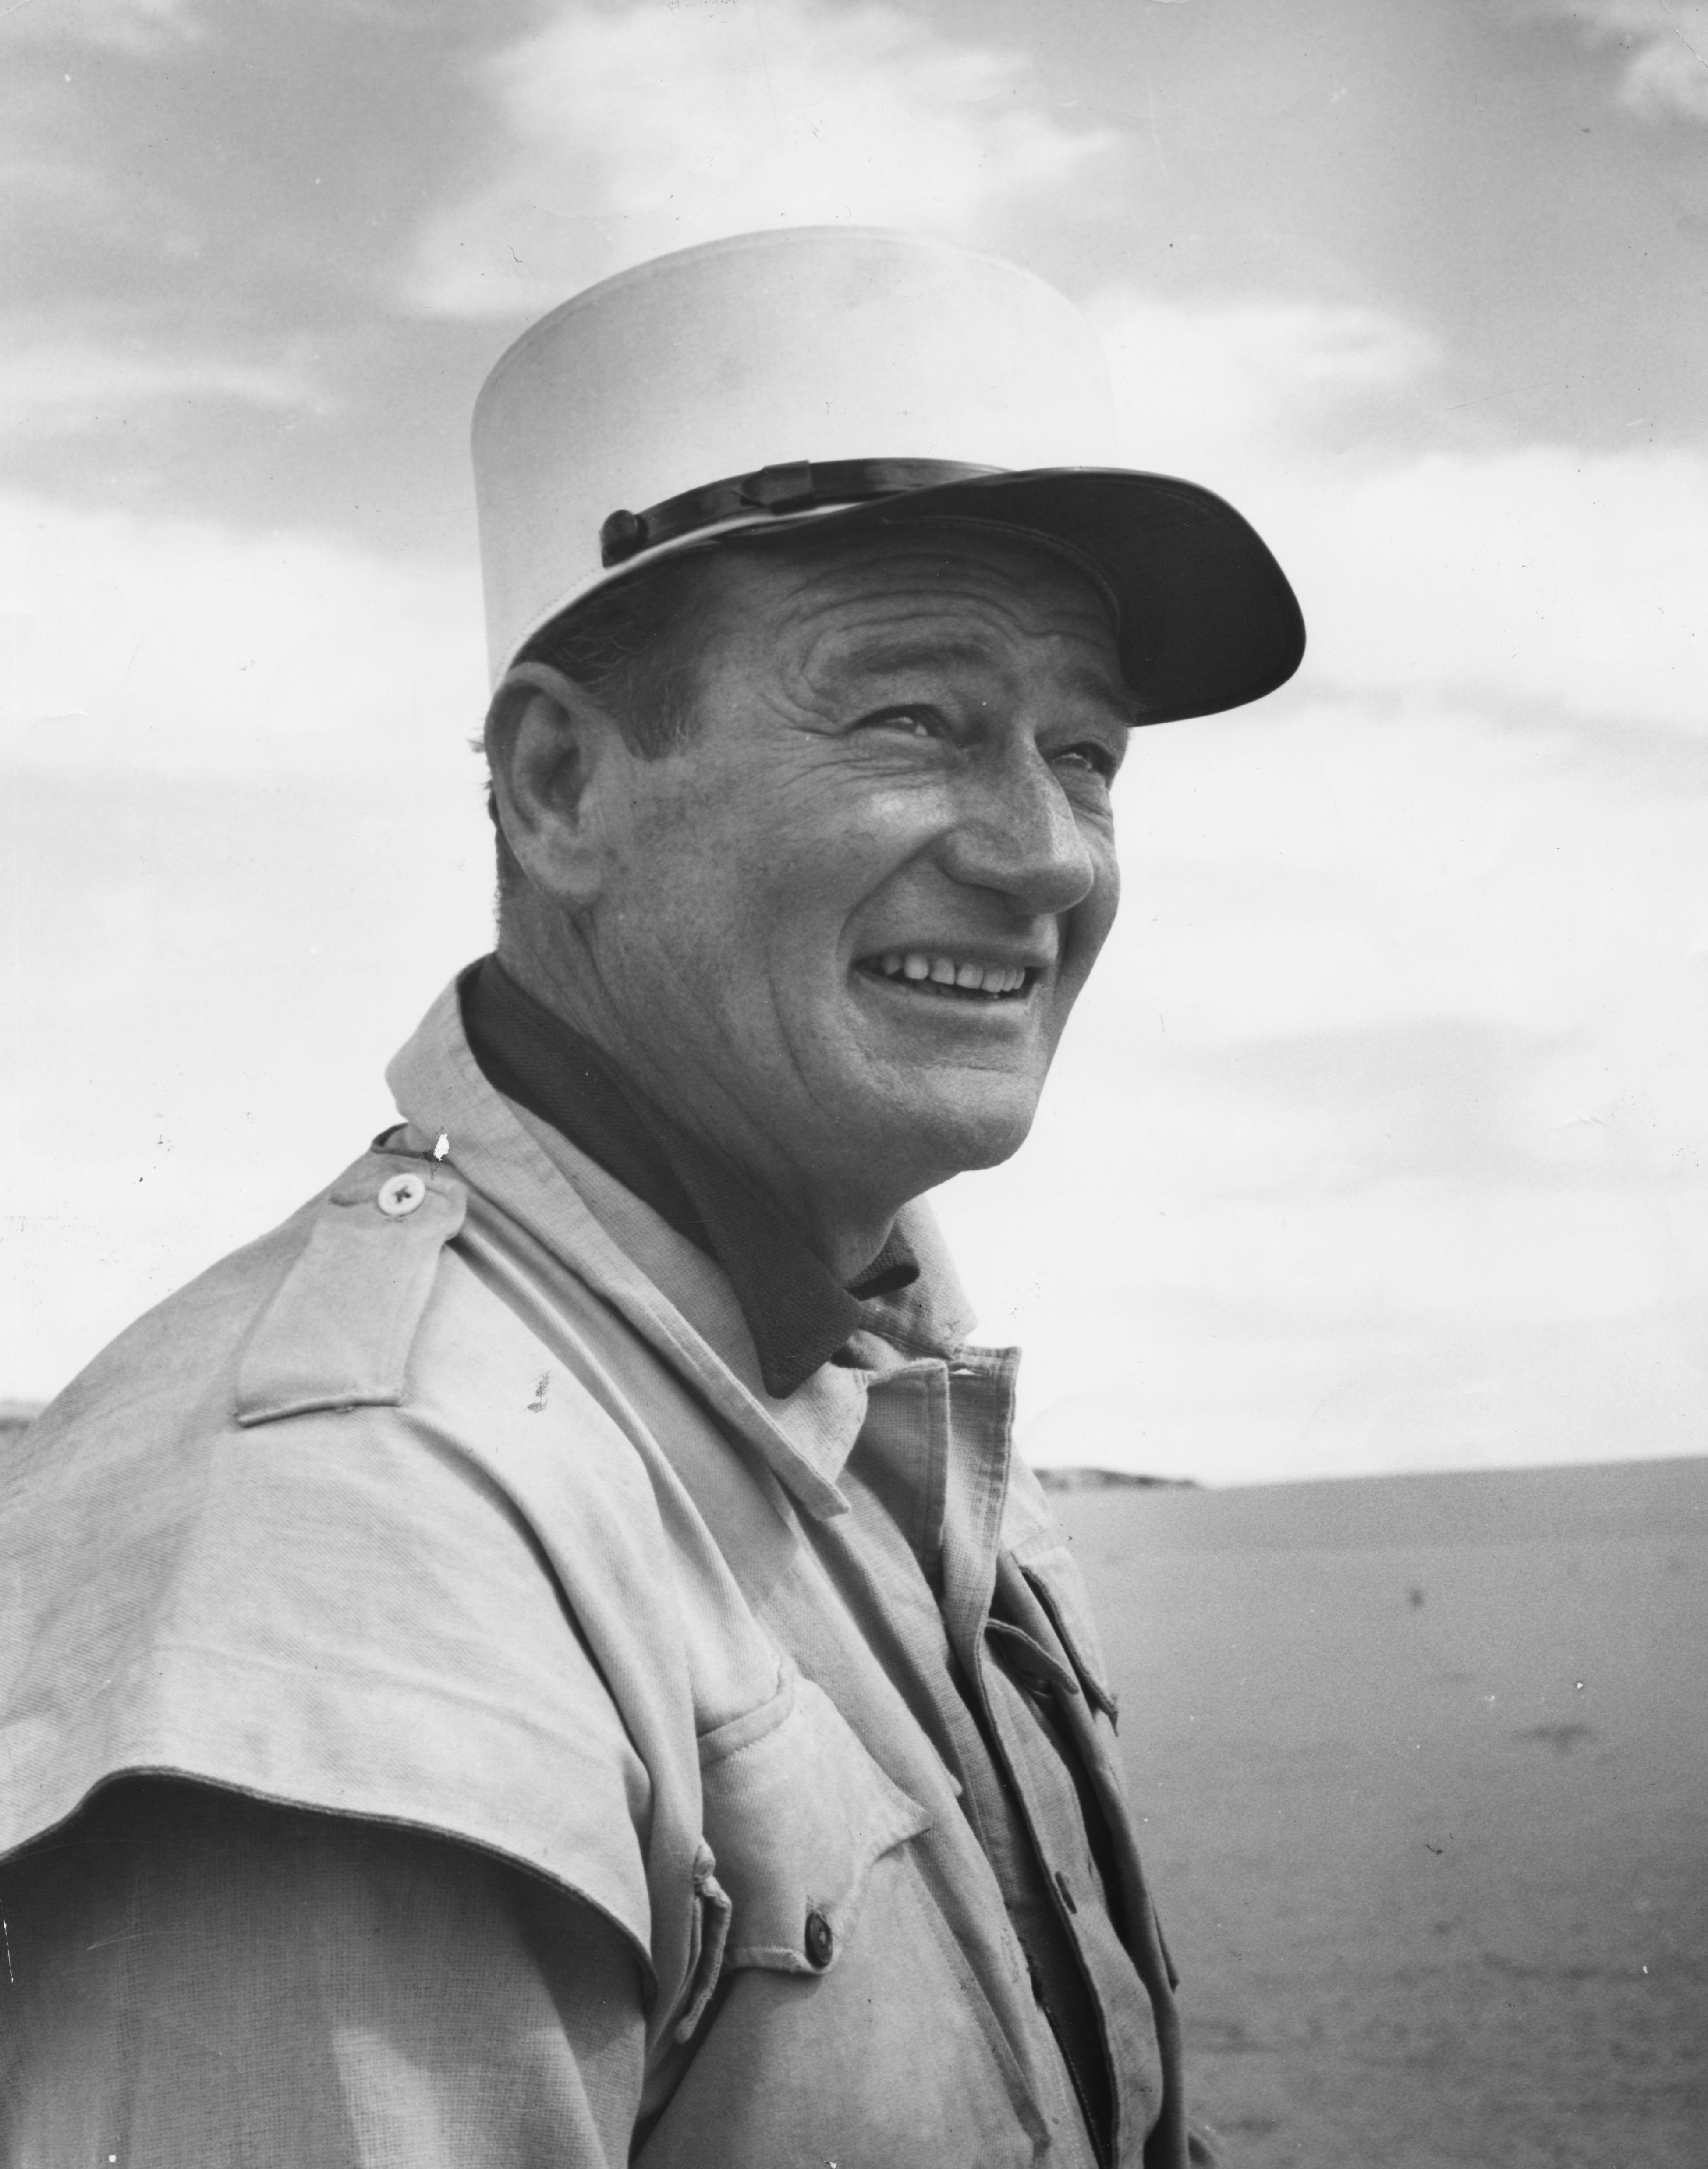 John Wayne filming the movie "Legend of the Lost", Tripoli, circa 1956. | Source: Getty Images